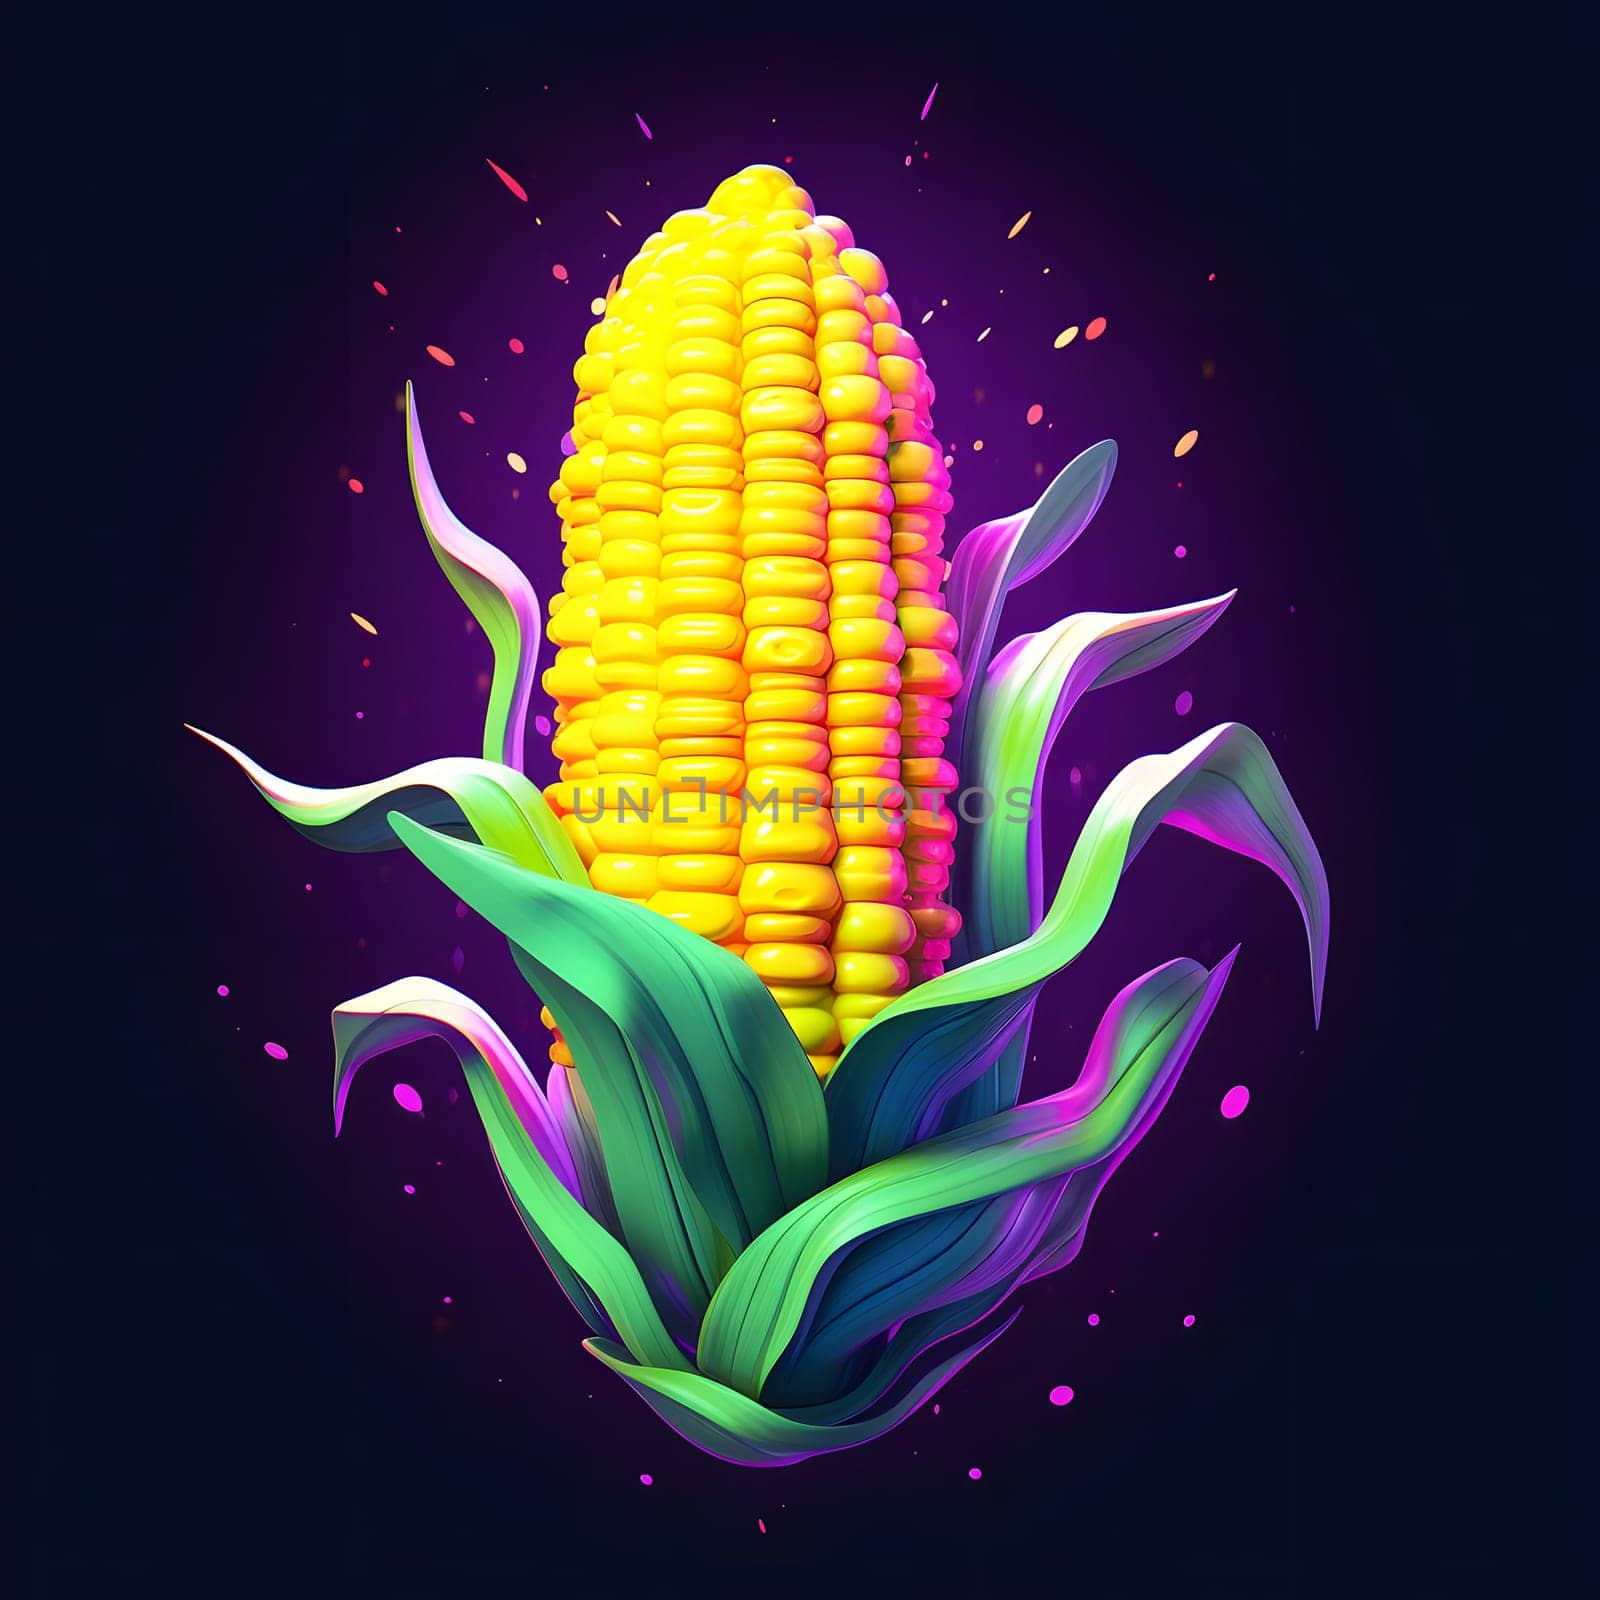 3D yellow corn cob in green leaf on purple dark background. Corn as a dish of thanksgiving for the harvest. An atmosphere of joy and celebration.